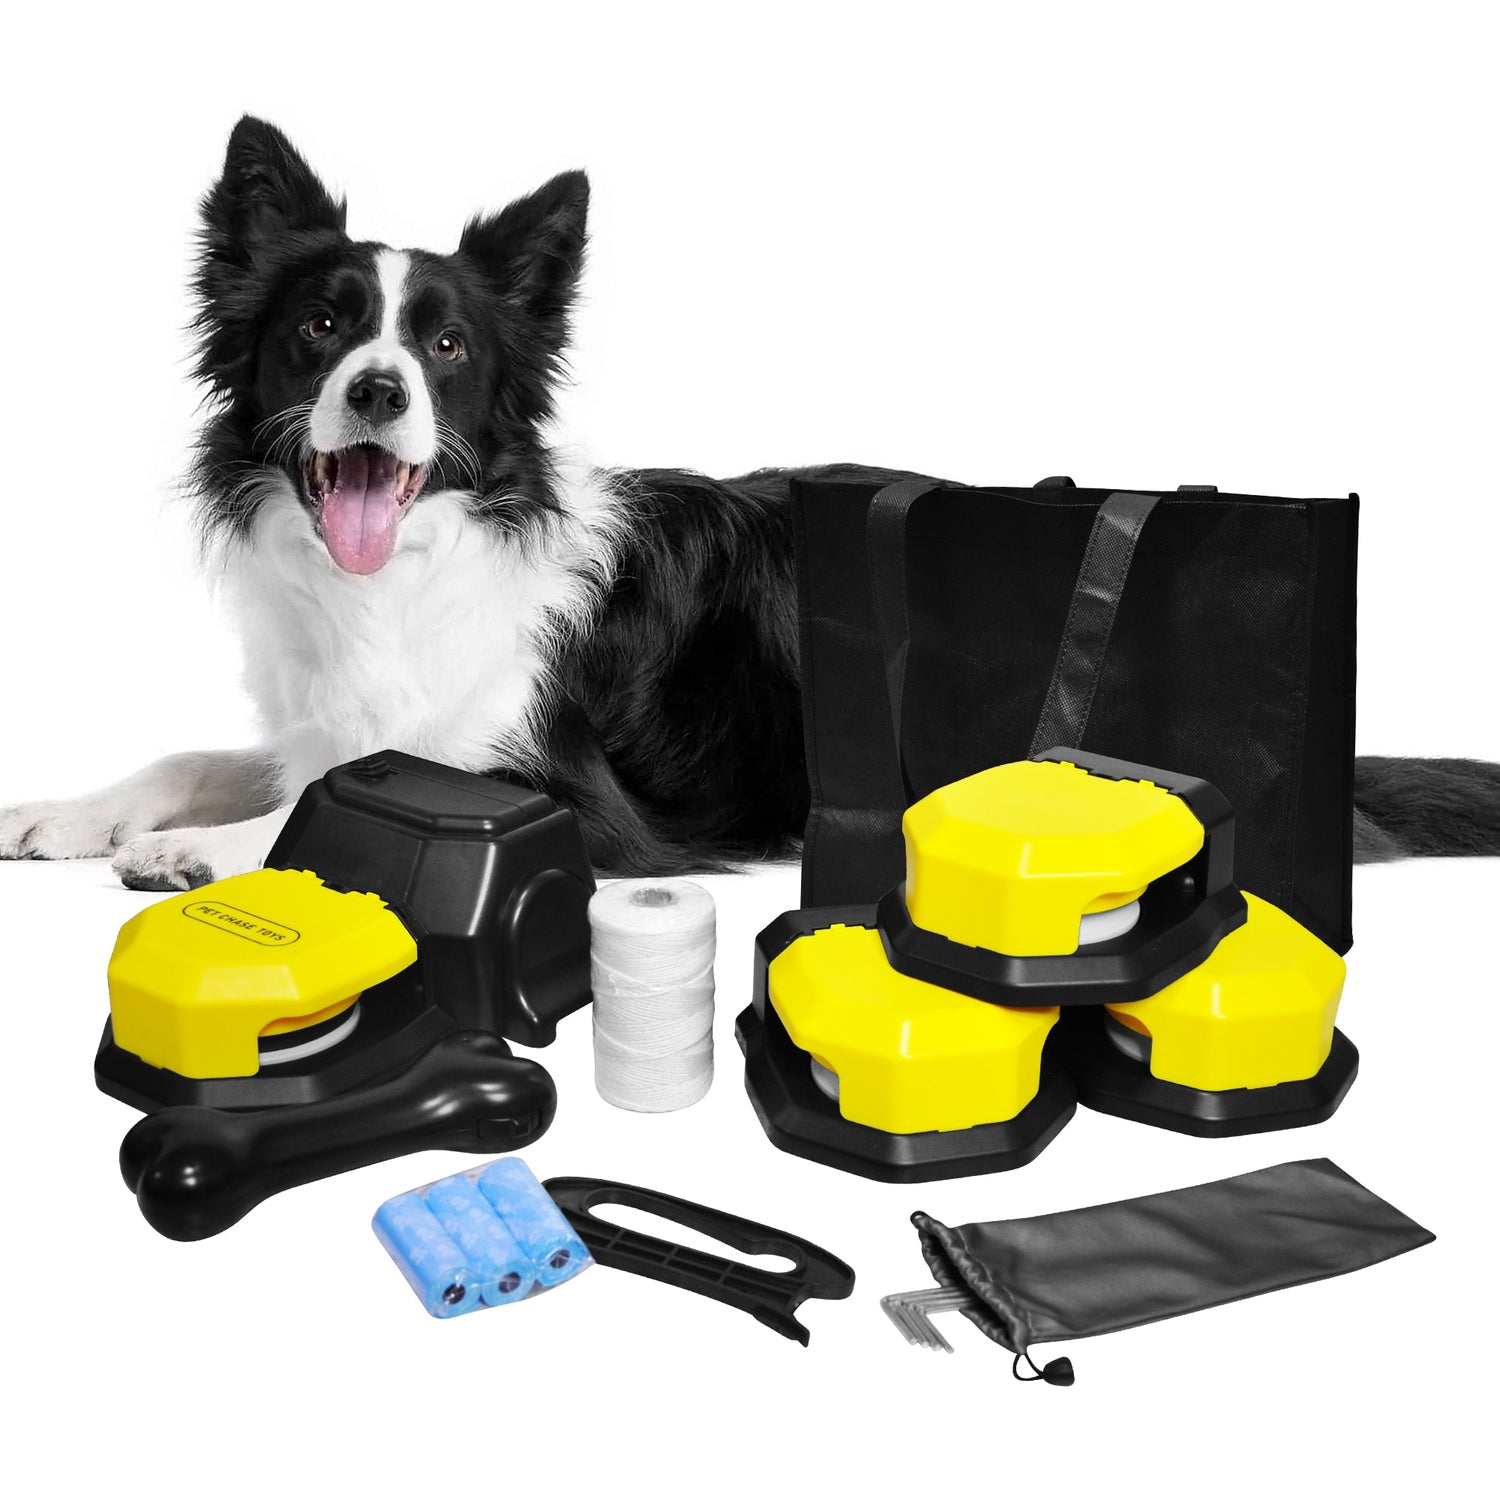 https://www.barkermeow.com/cdn/shop/files/QlcEPet-Chase-Toys-Interactive-Dog-Toys-Agility-Training-Equipment-for-Dogs-Pet-Remote-Control-Toys_86fdbff6-27aa-47d3-bc2e-24c3d937f410_1500x.jpg?v=1692500692